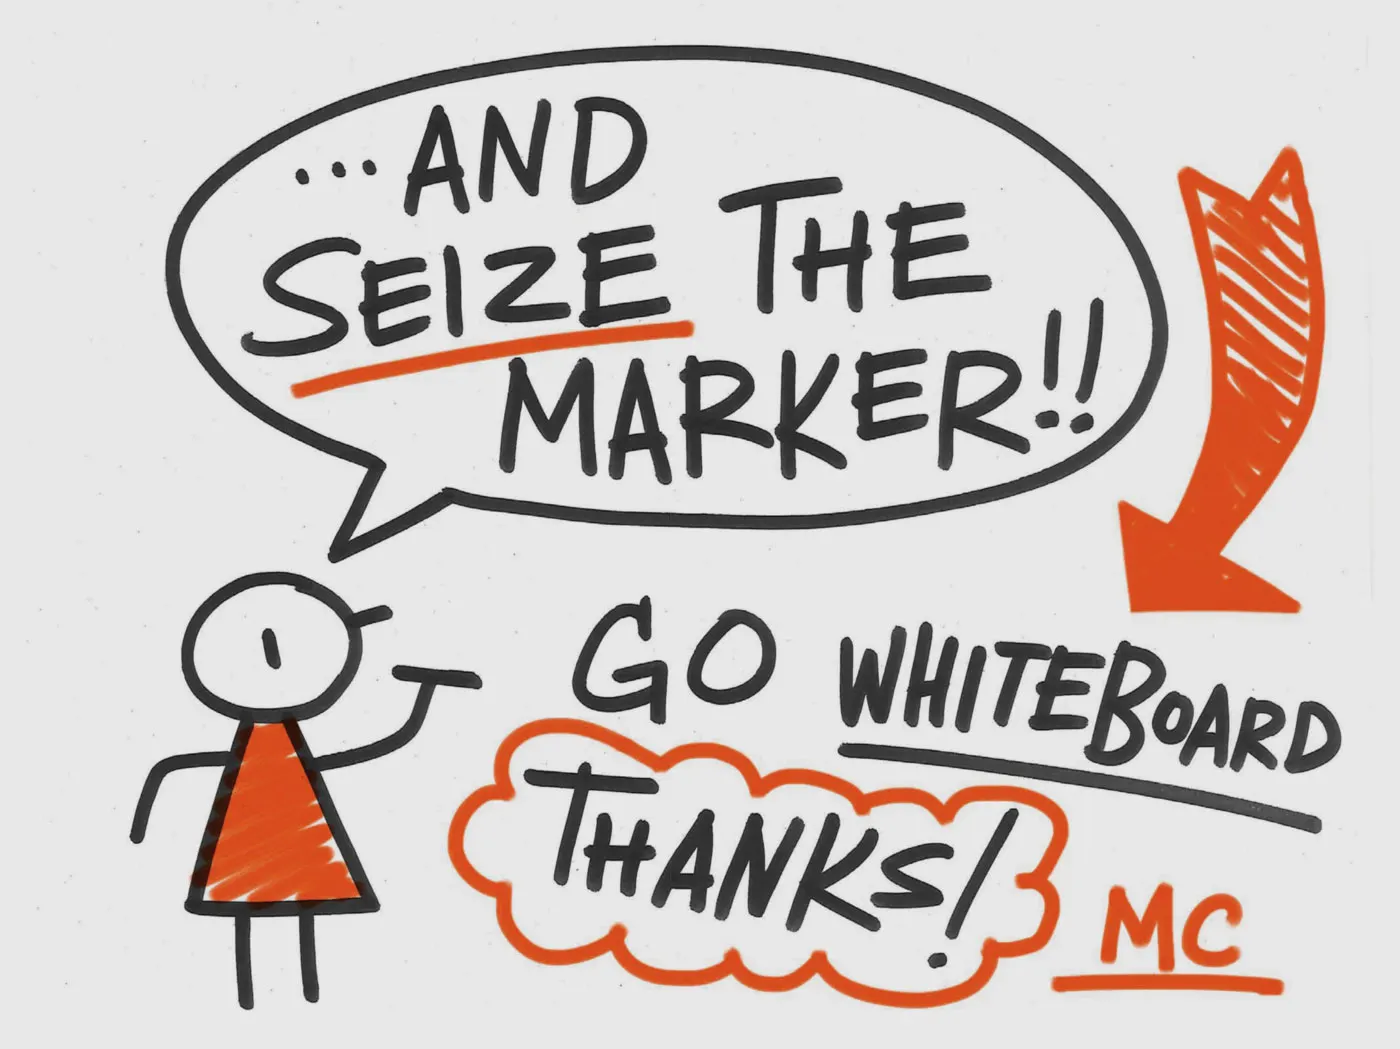 Black marker sketch of a stick figure saying "And seize the marker!" with the words Go whiteboard! Thanks! MC underneath it.